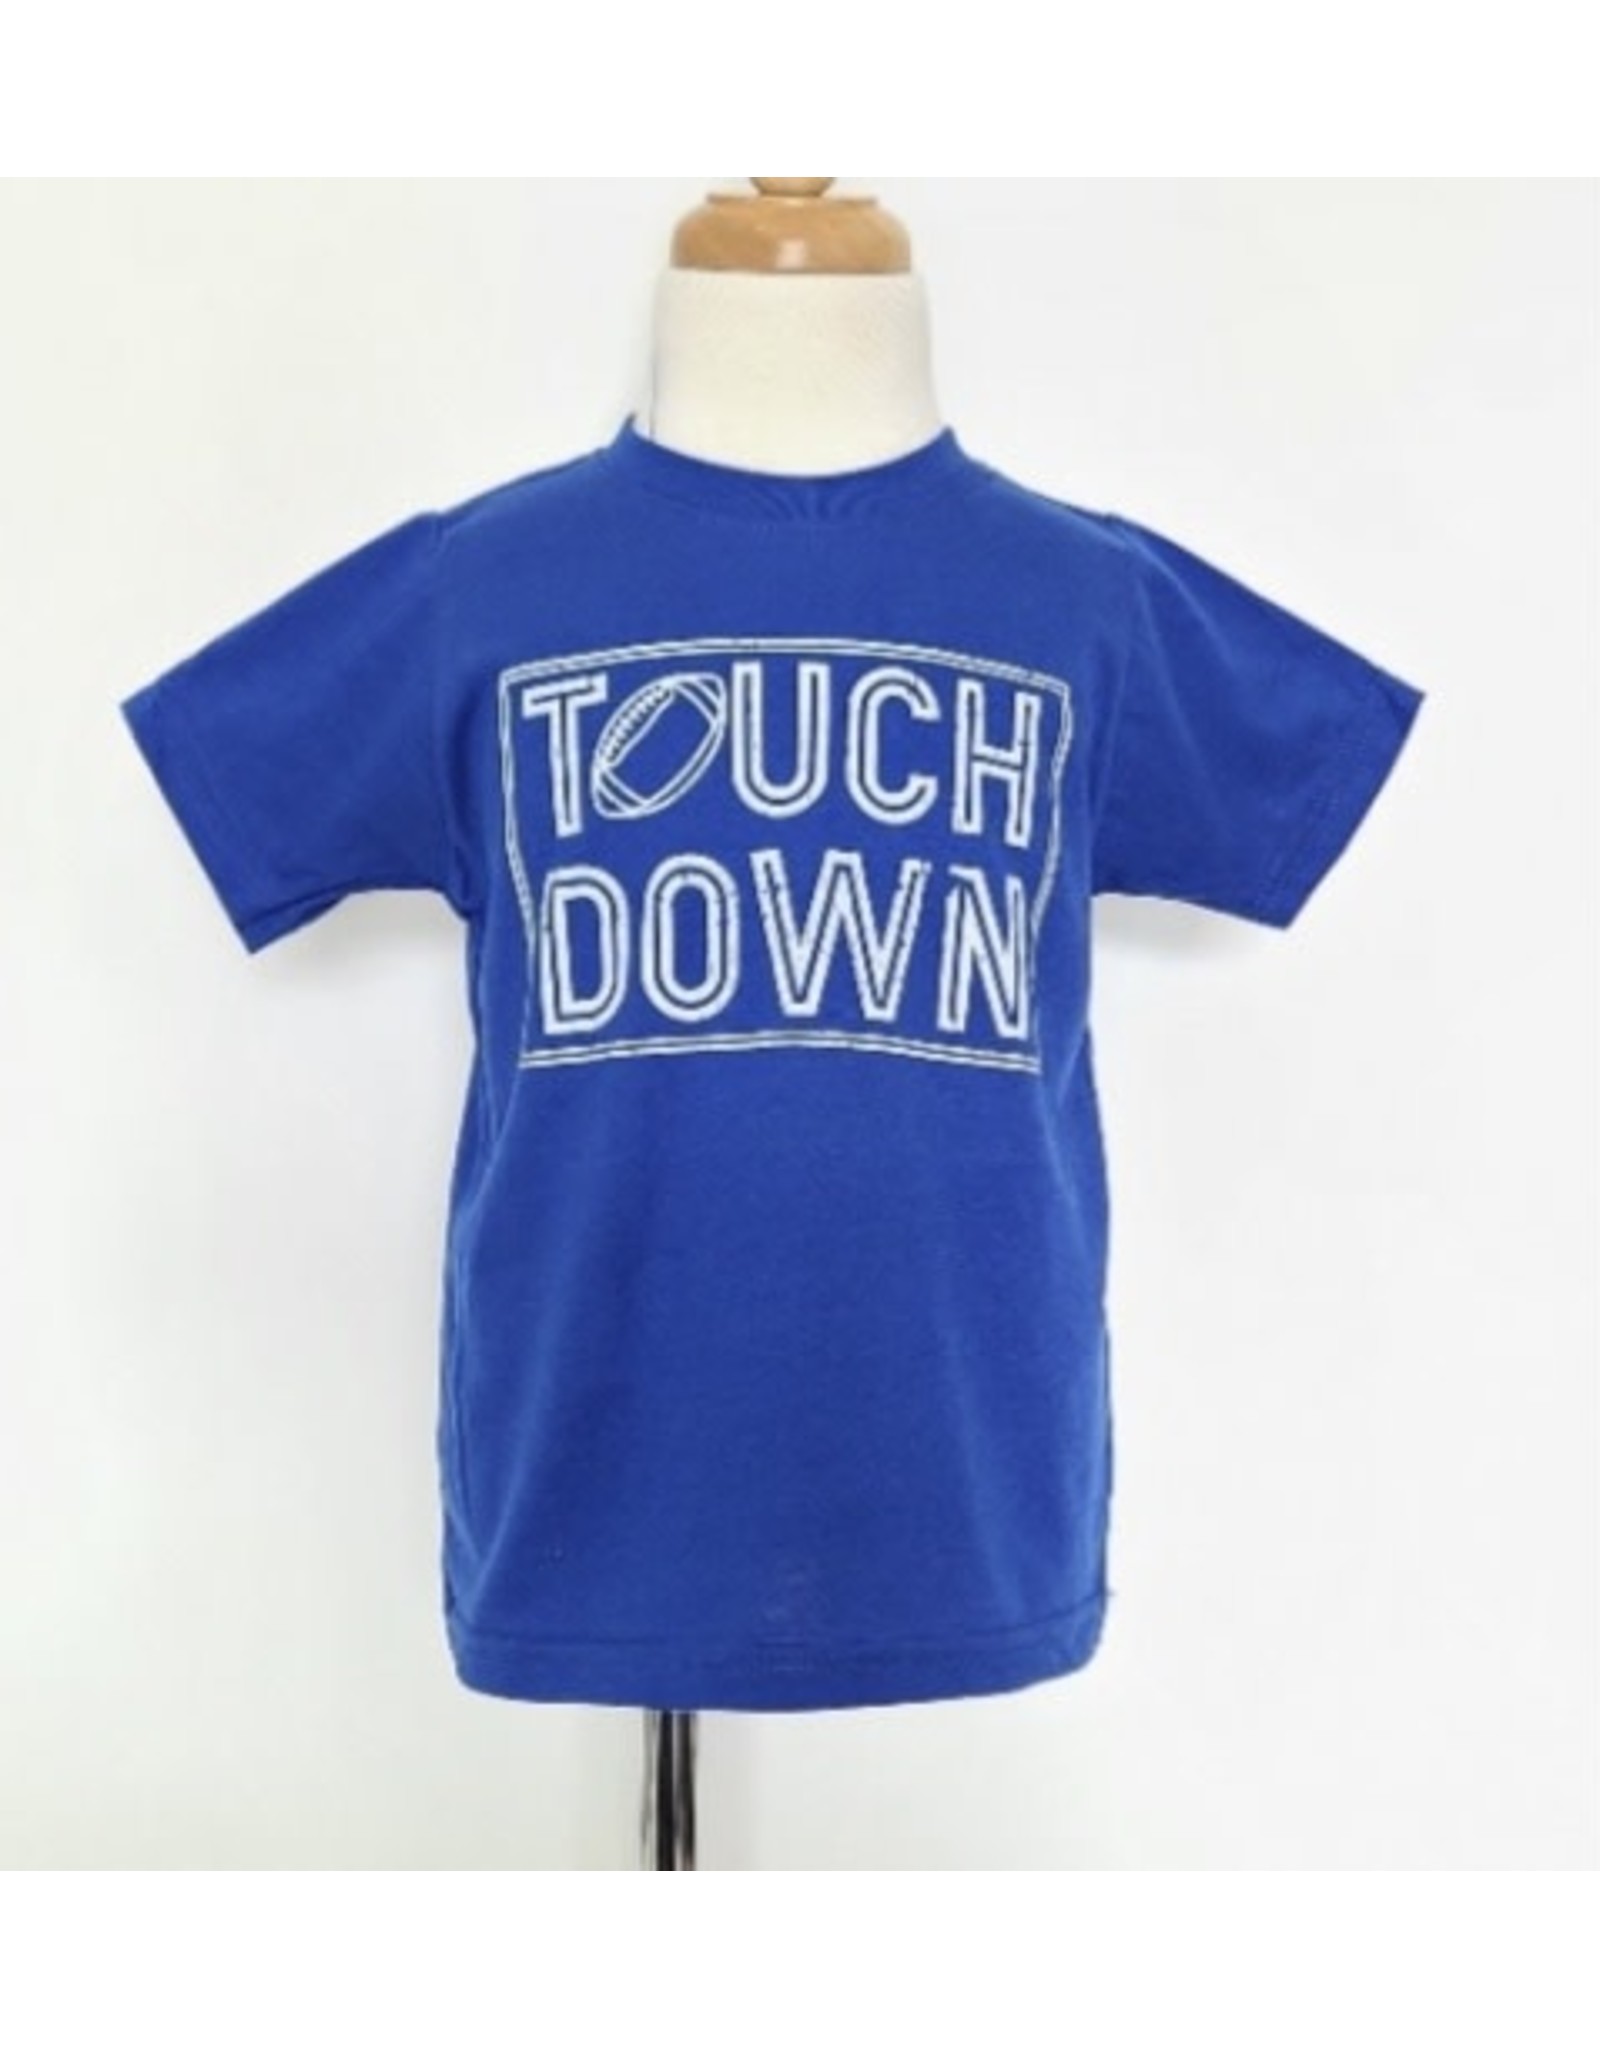 TOUCH DOWN Tee: Royal Blue